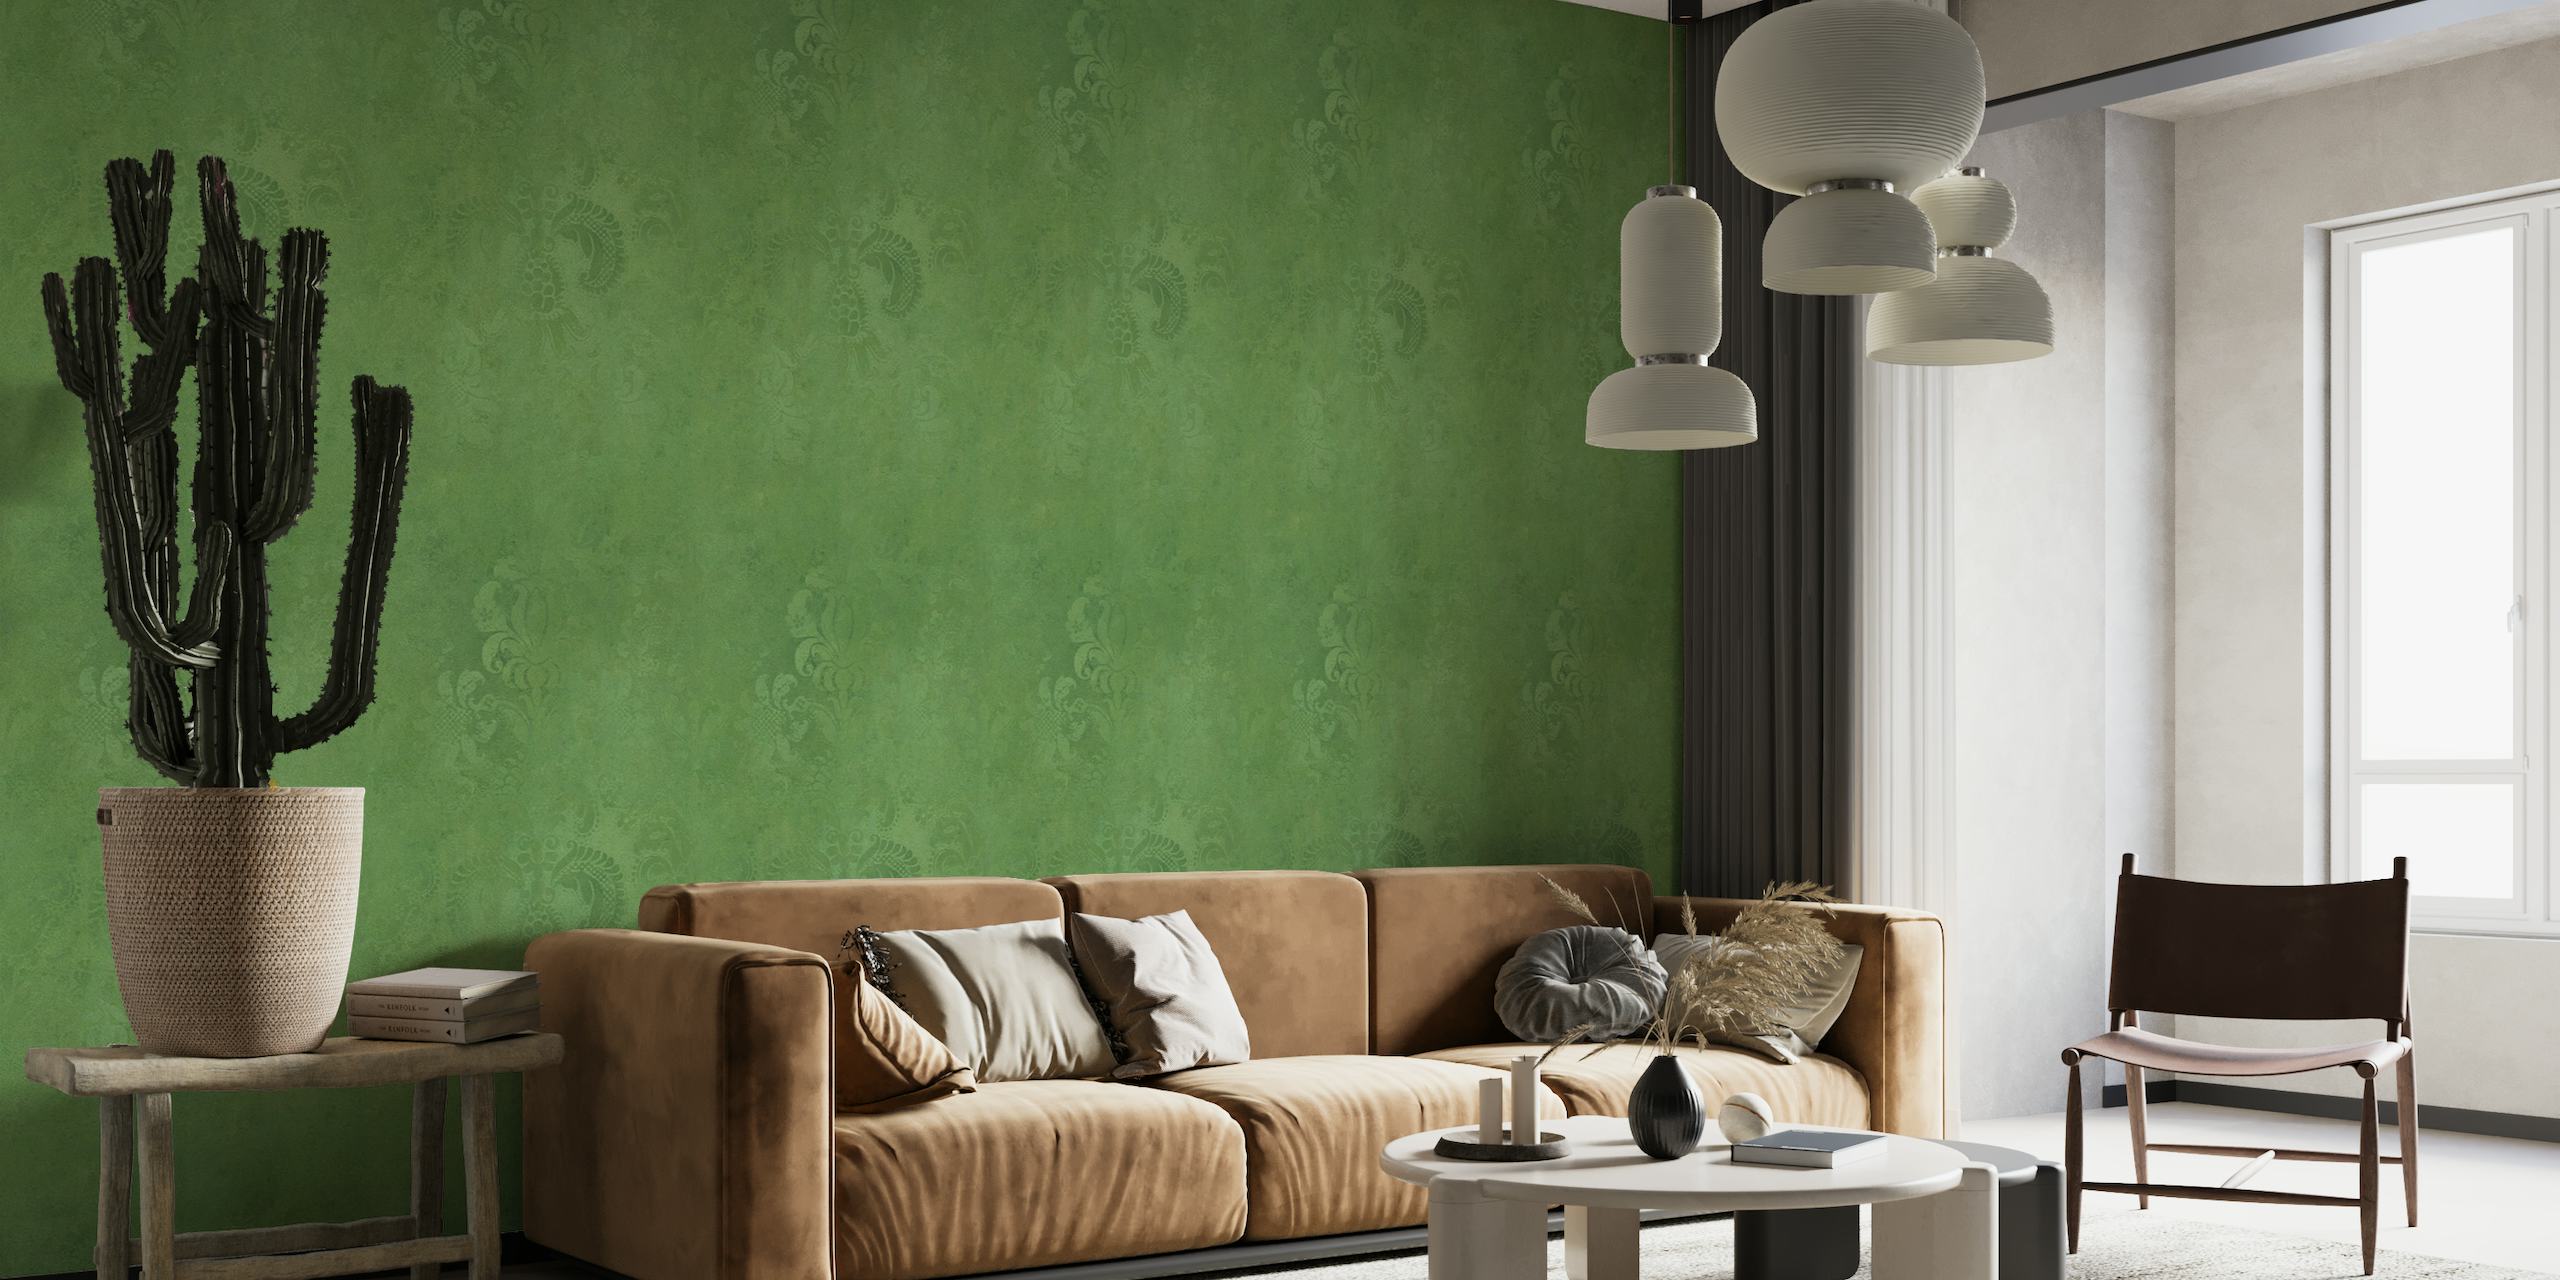 Grunge Damask Pattern wall mural in apple green color with vintage design elements